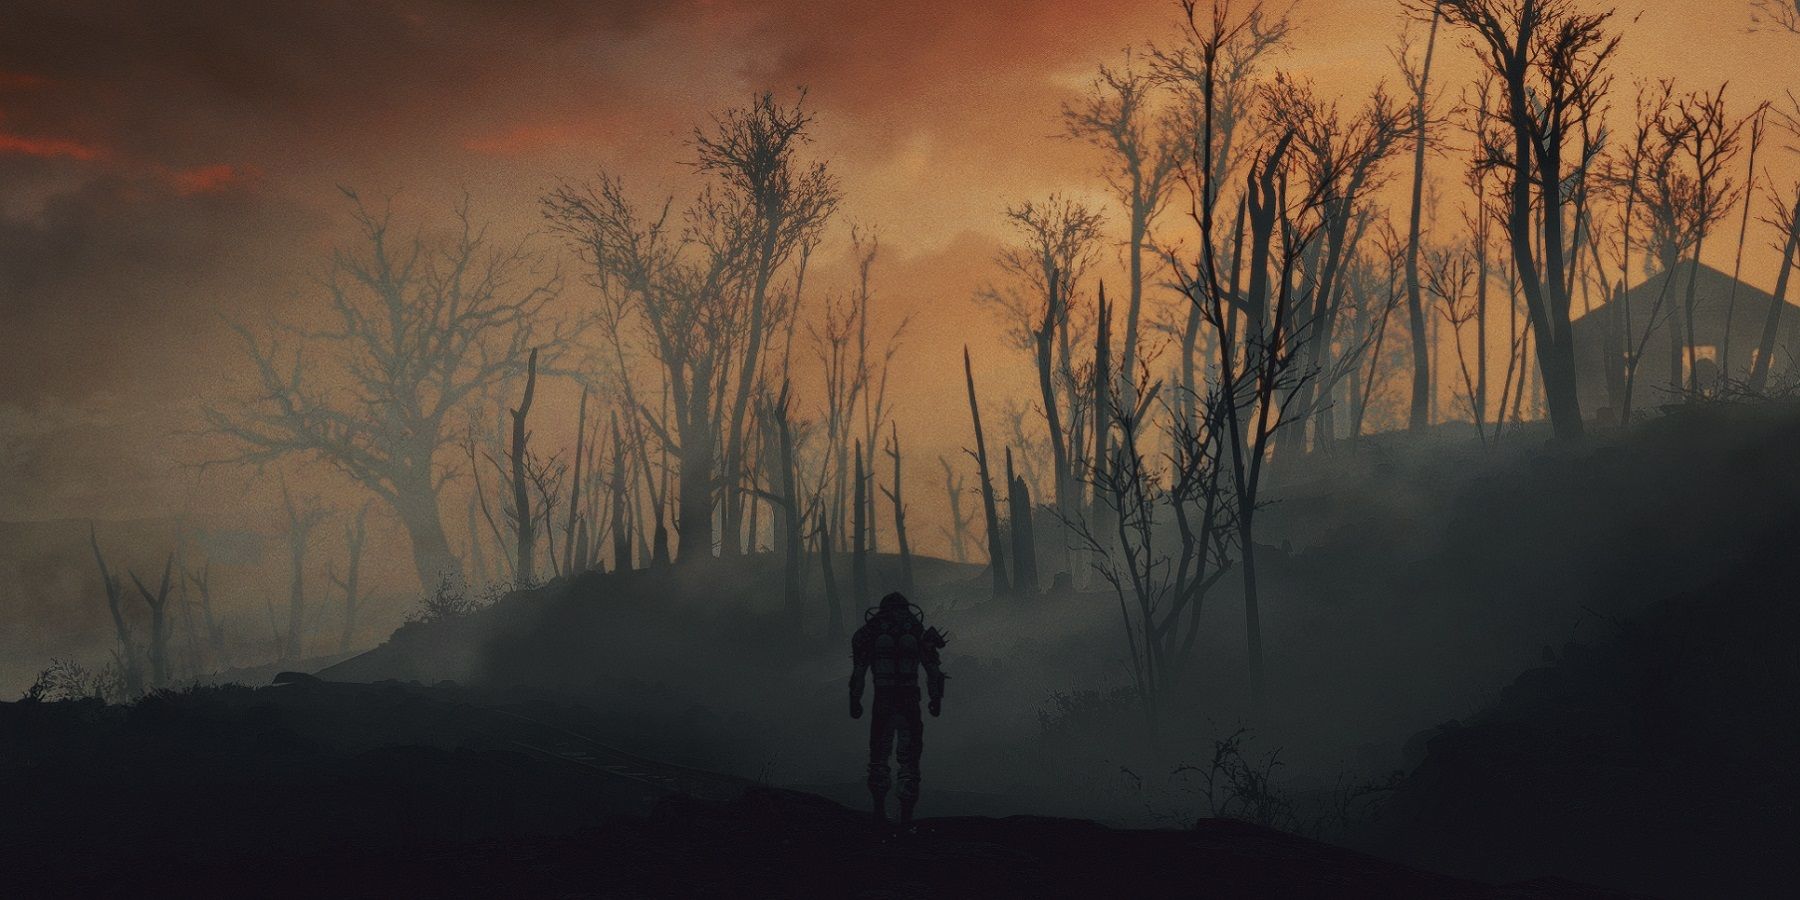 Image from Fallout 4 showing a desolate wasteland with an orange glow in the sky.